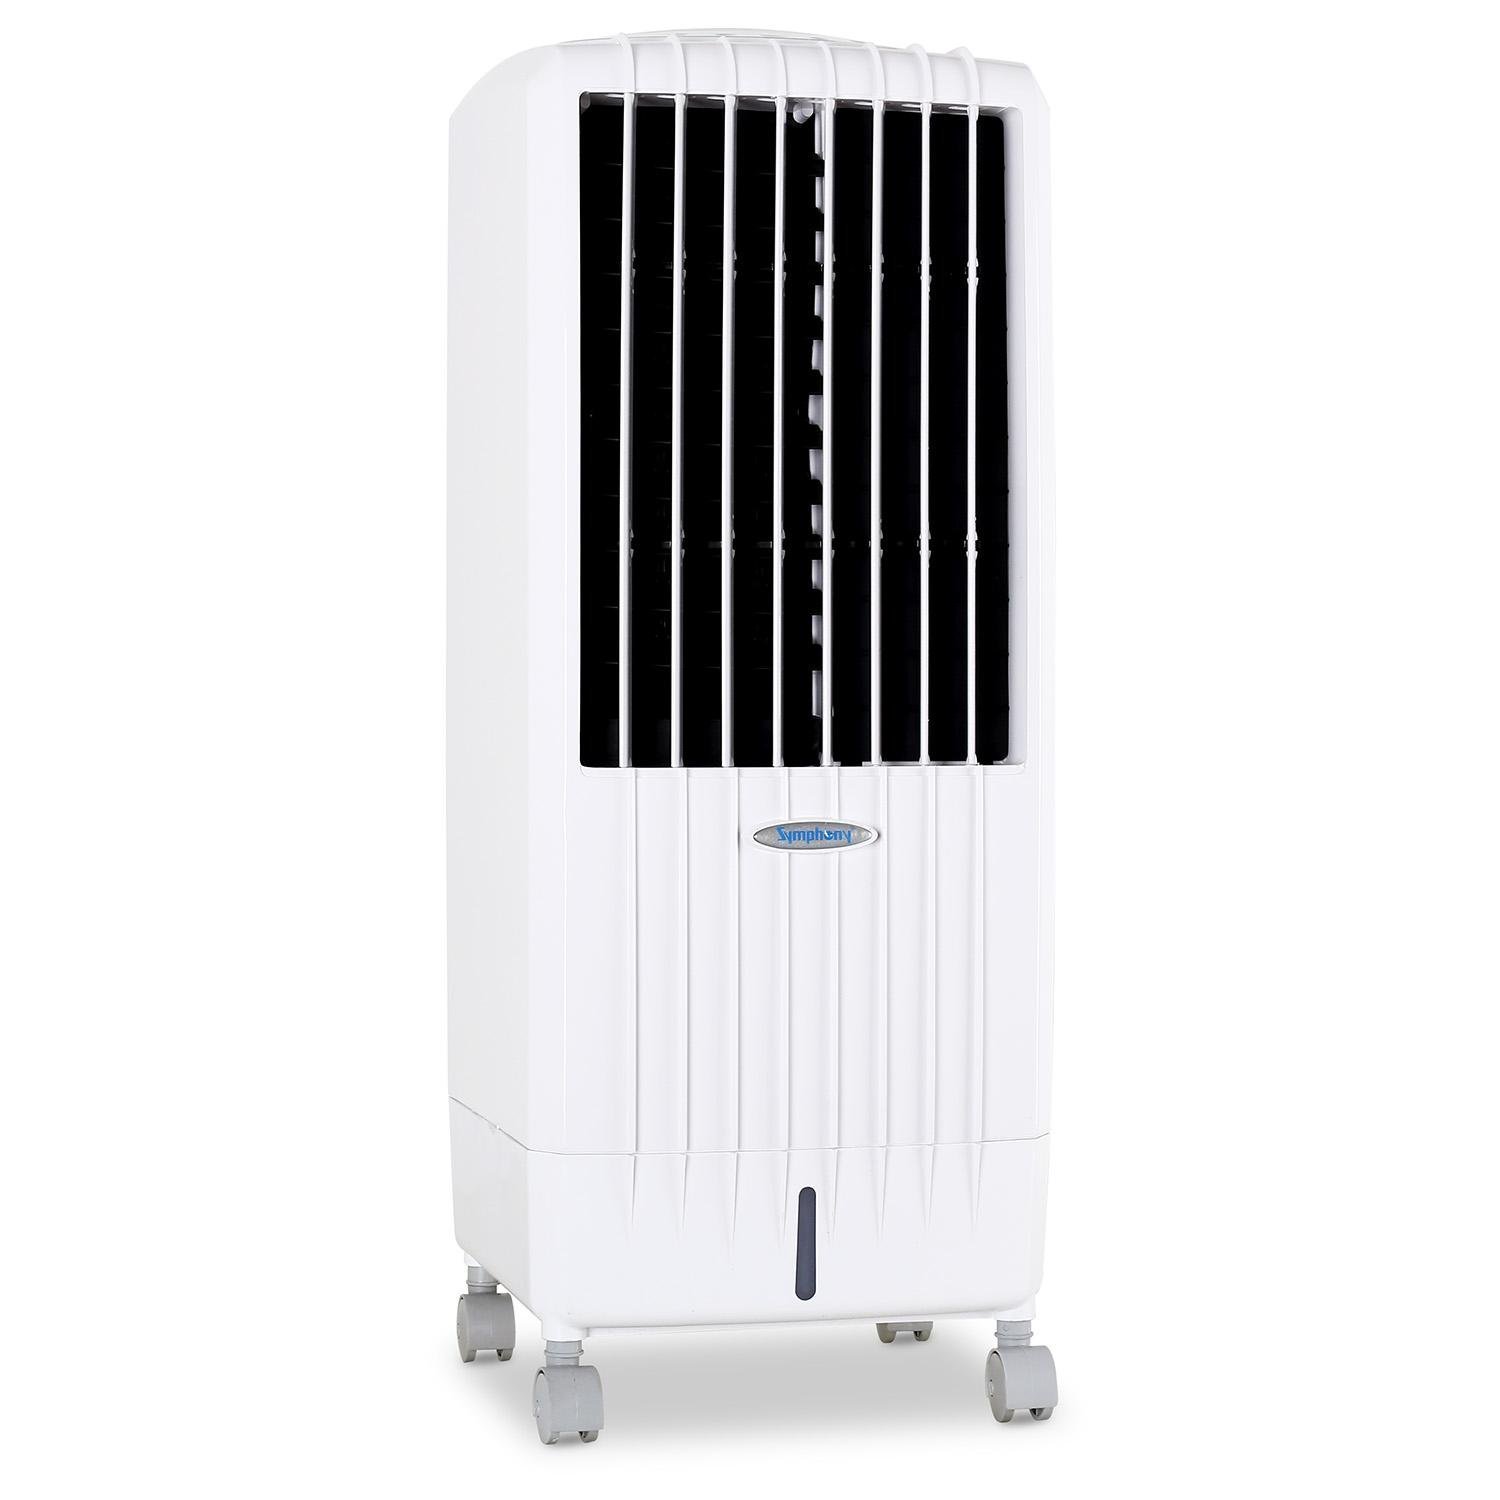 DiET8i Evaporative Cooler for Rooms up to 12.5M2 by DiET